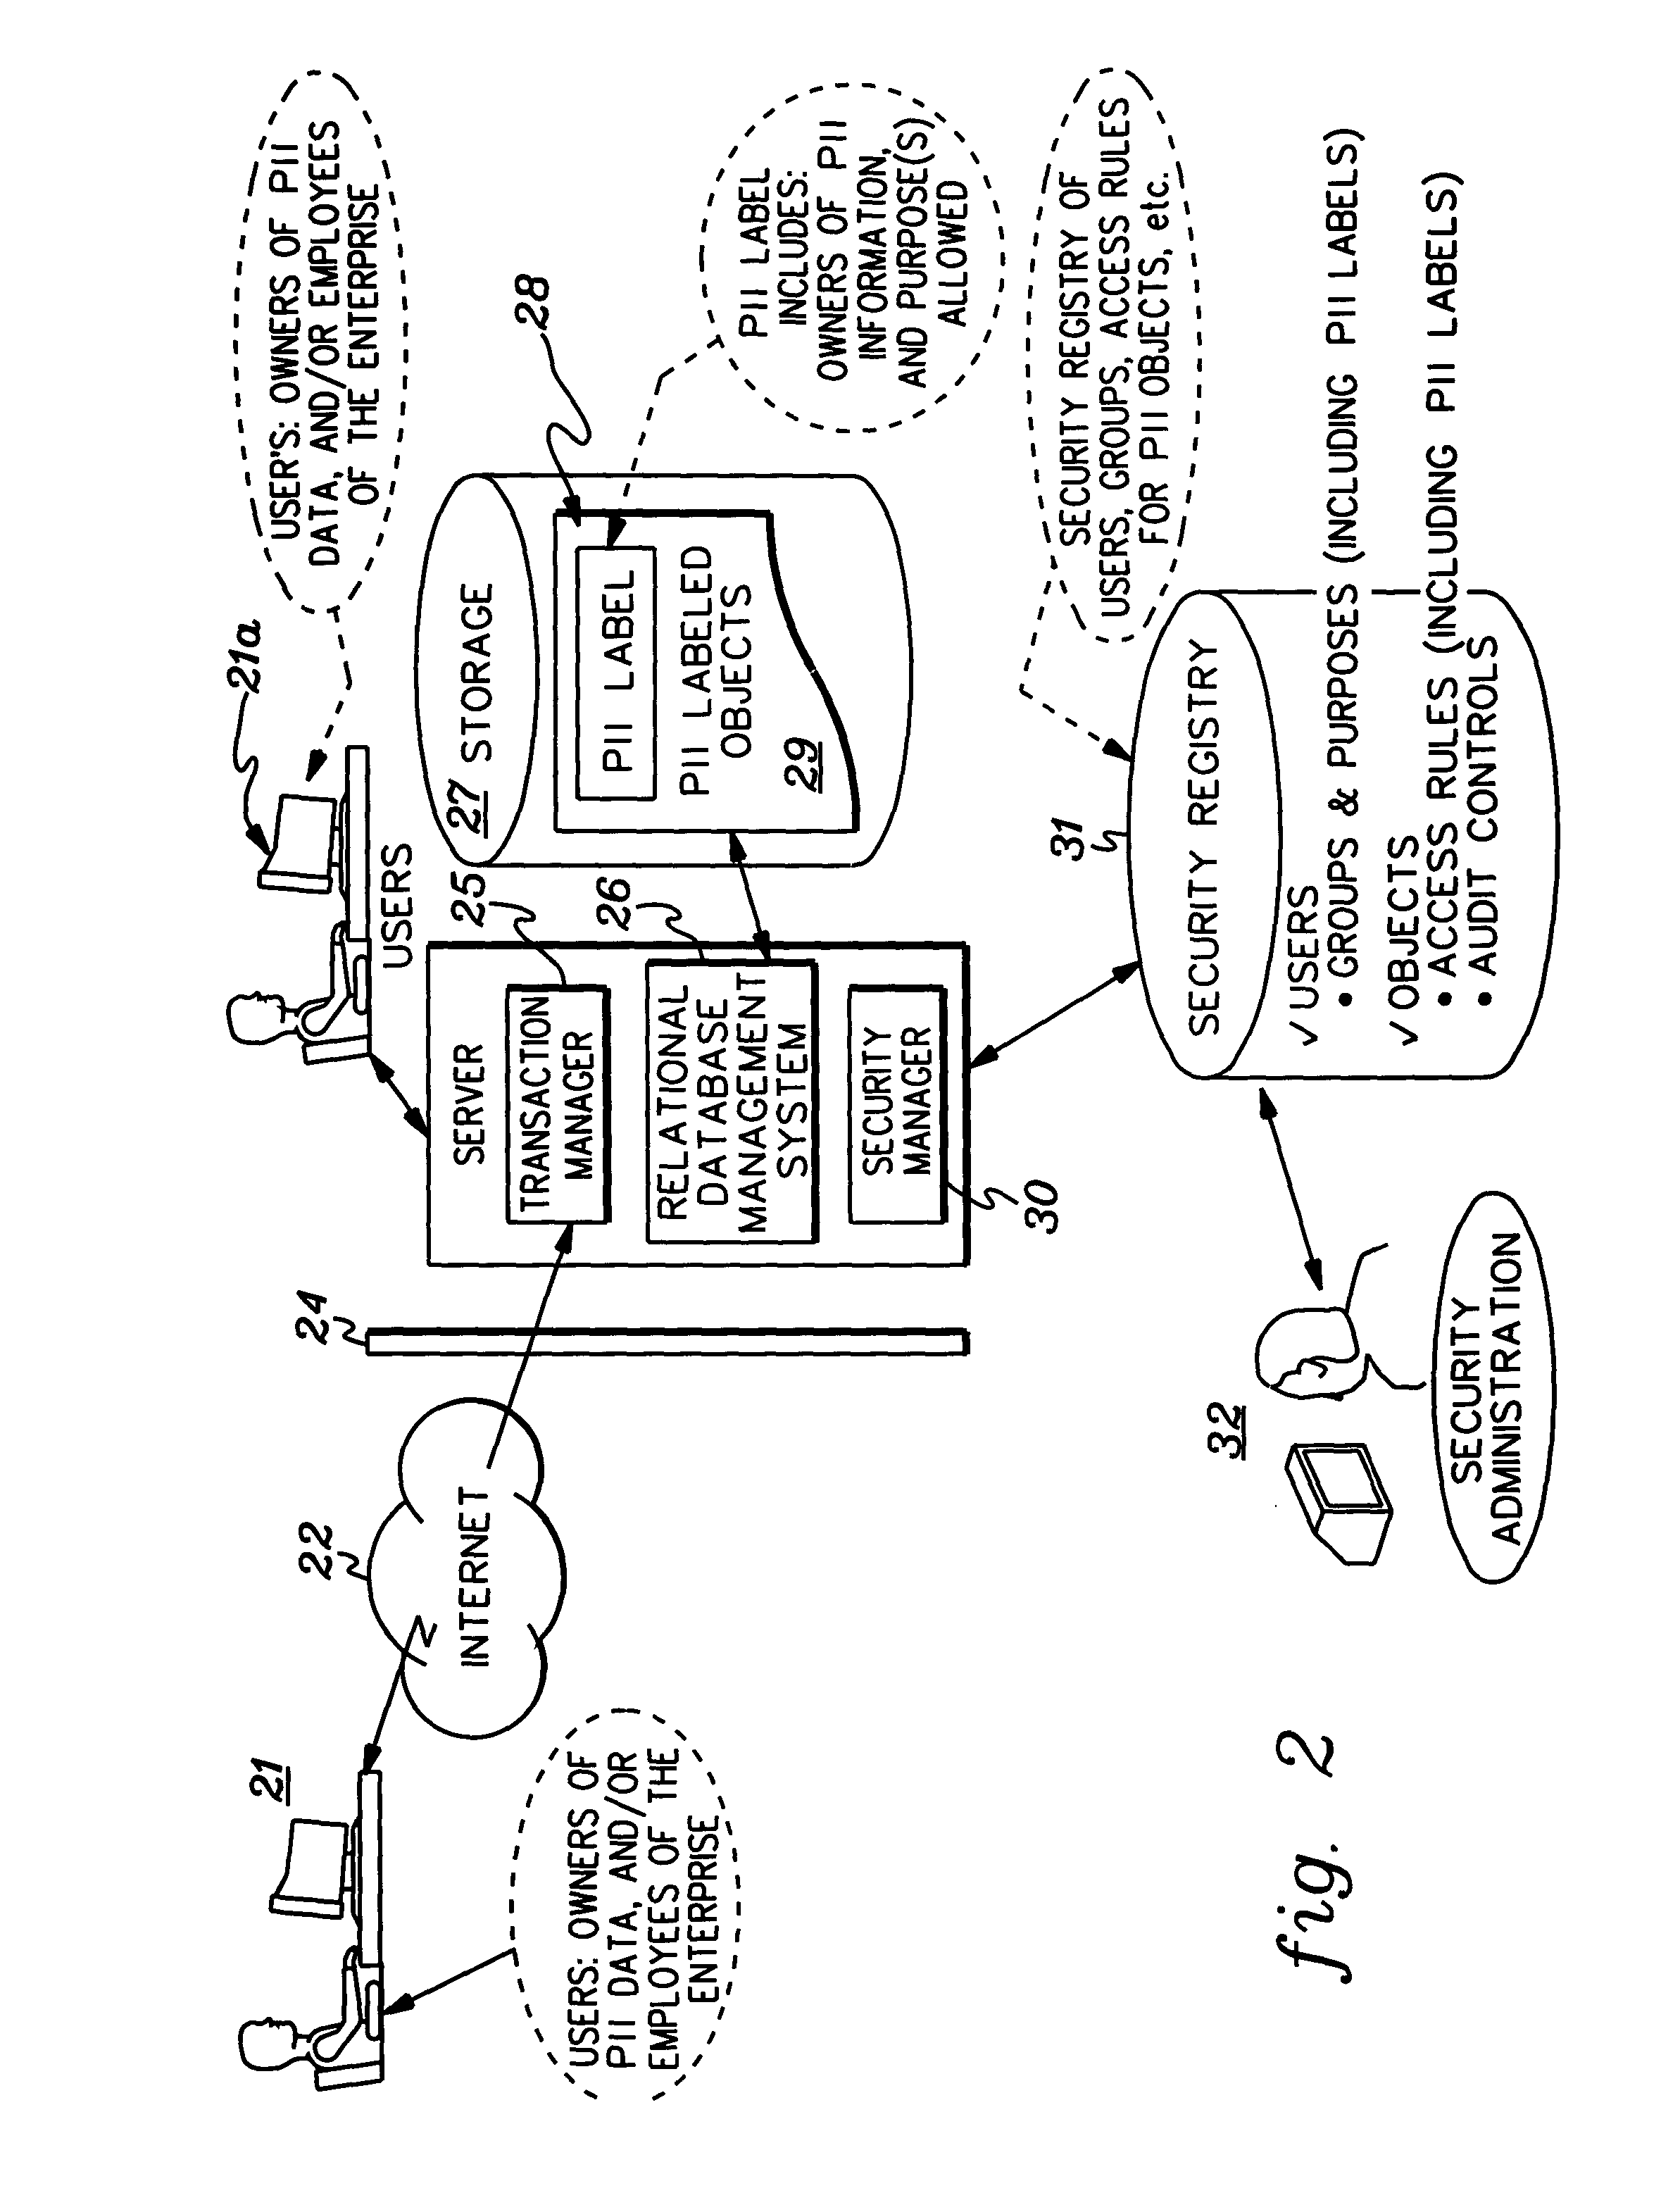 Implementation and use of a PII data access control facility employing personally identifying information labels and purpose serving functions sets